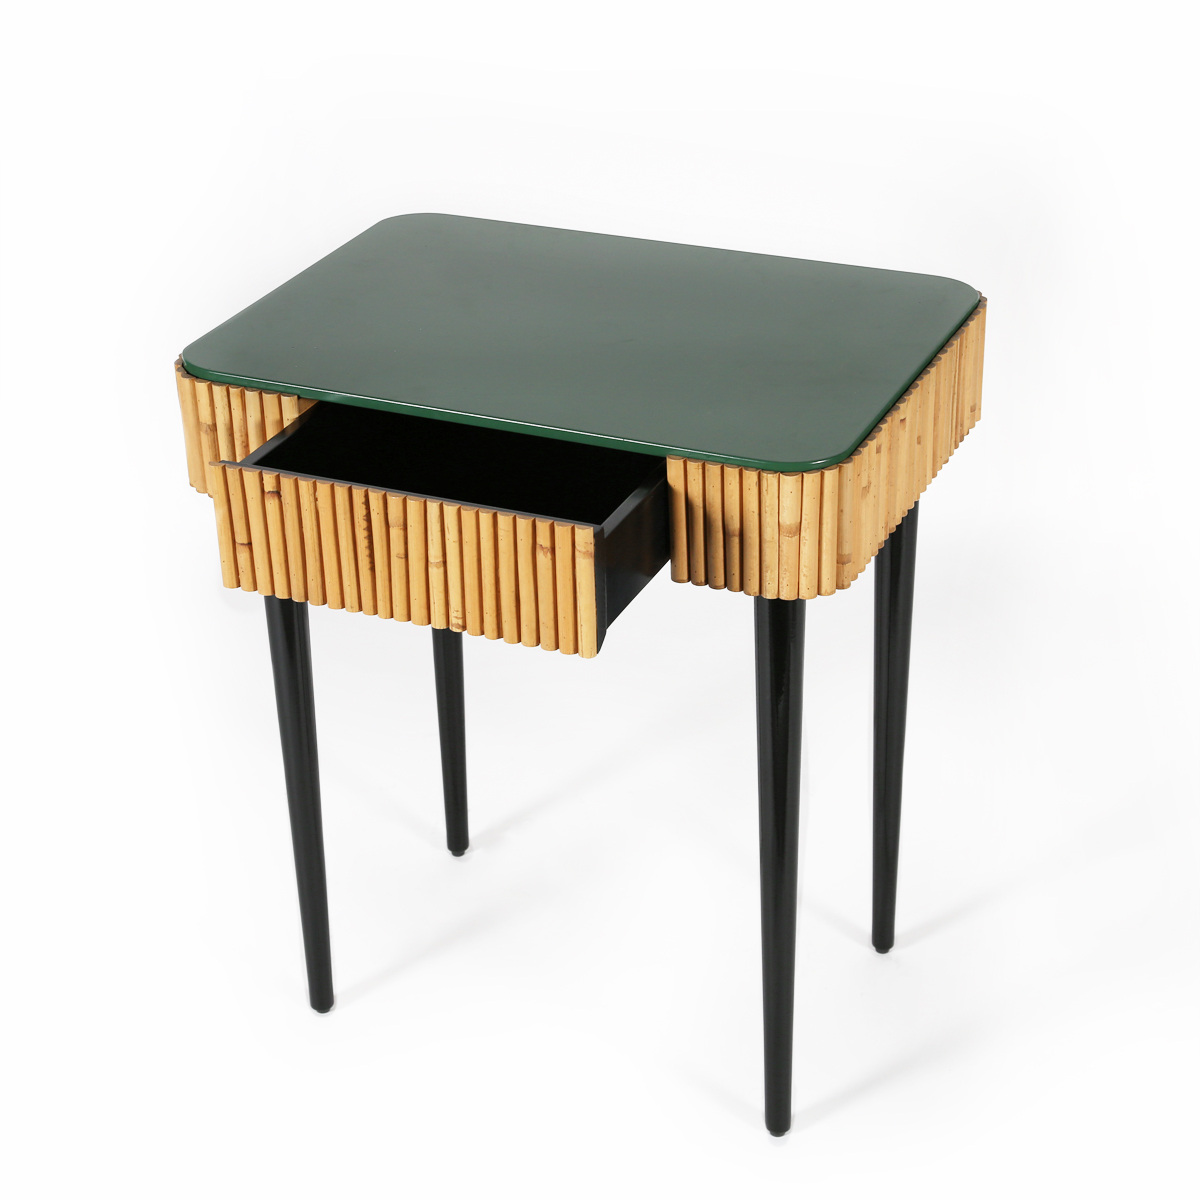 Bedside Table Riviera, Black Radish - H65 cm - Wicker / Lacquered wood - image 10